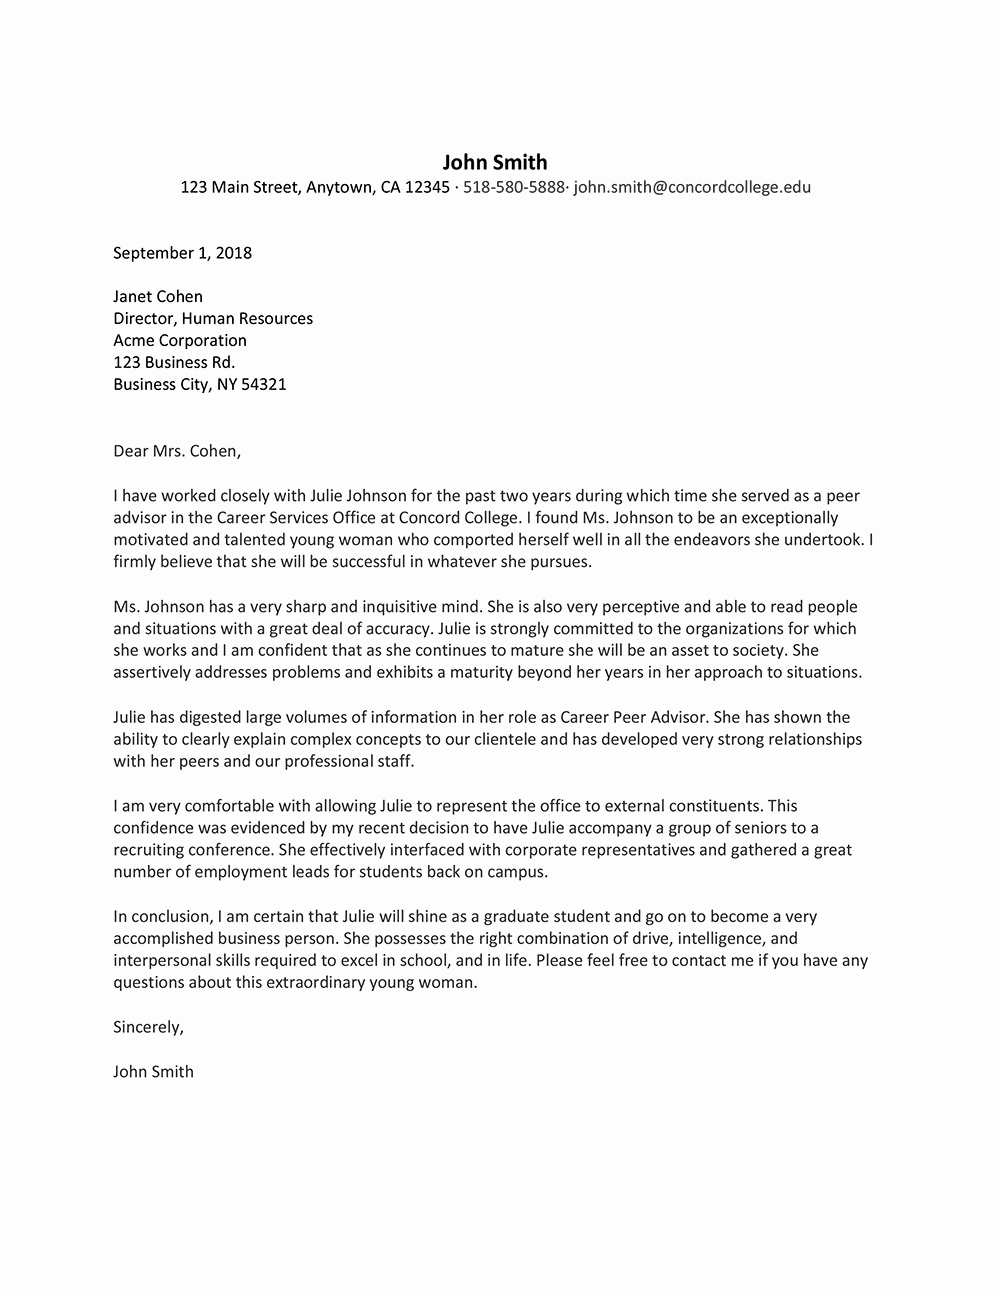 Recommendation Letter for Mba Program New Examples Letters to Congressman About Healthcare